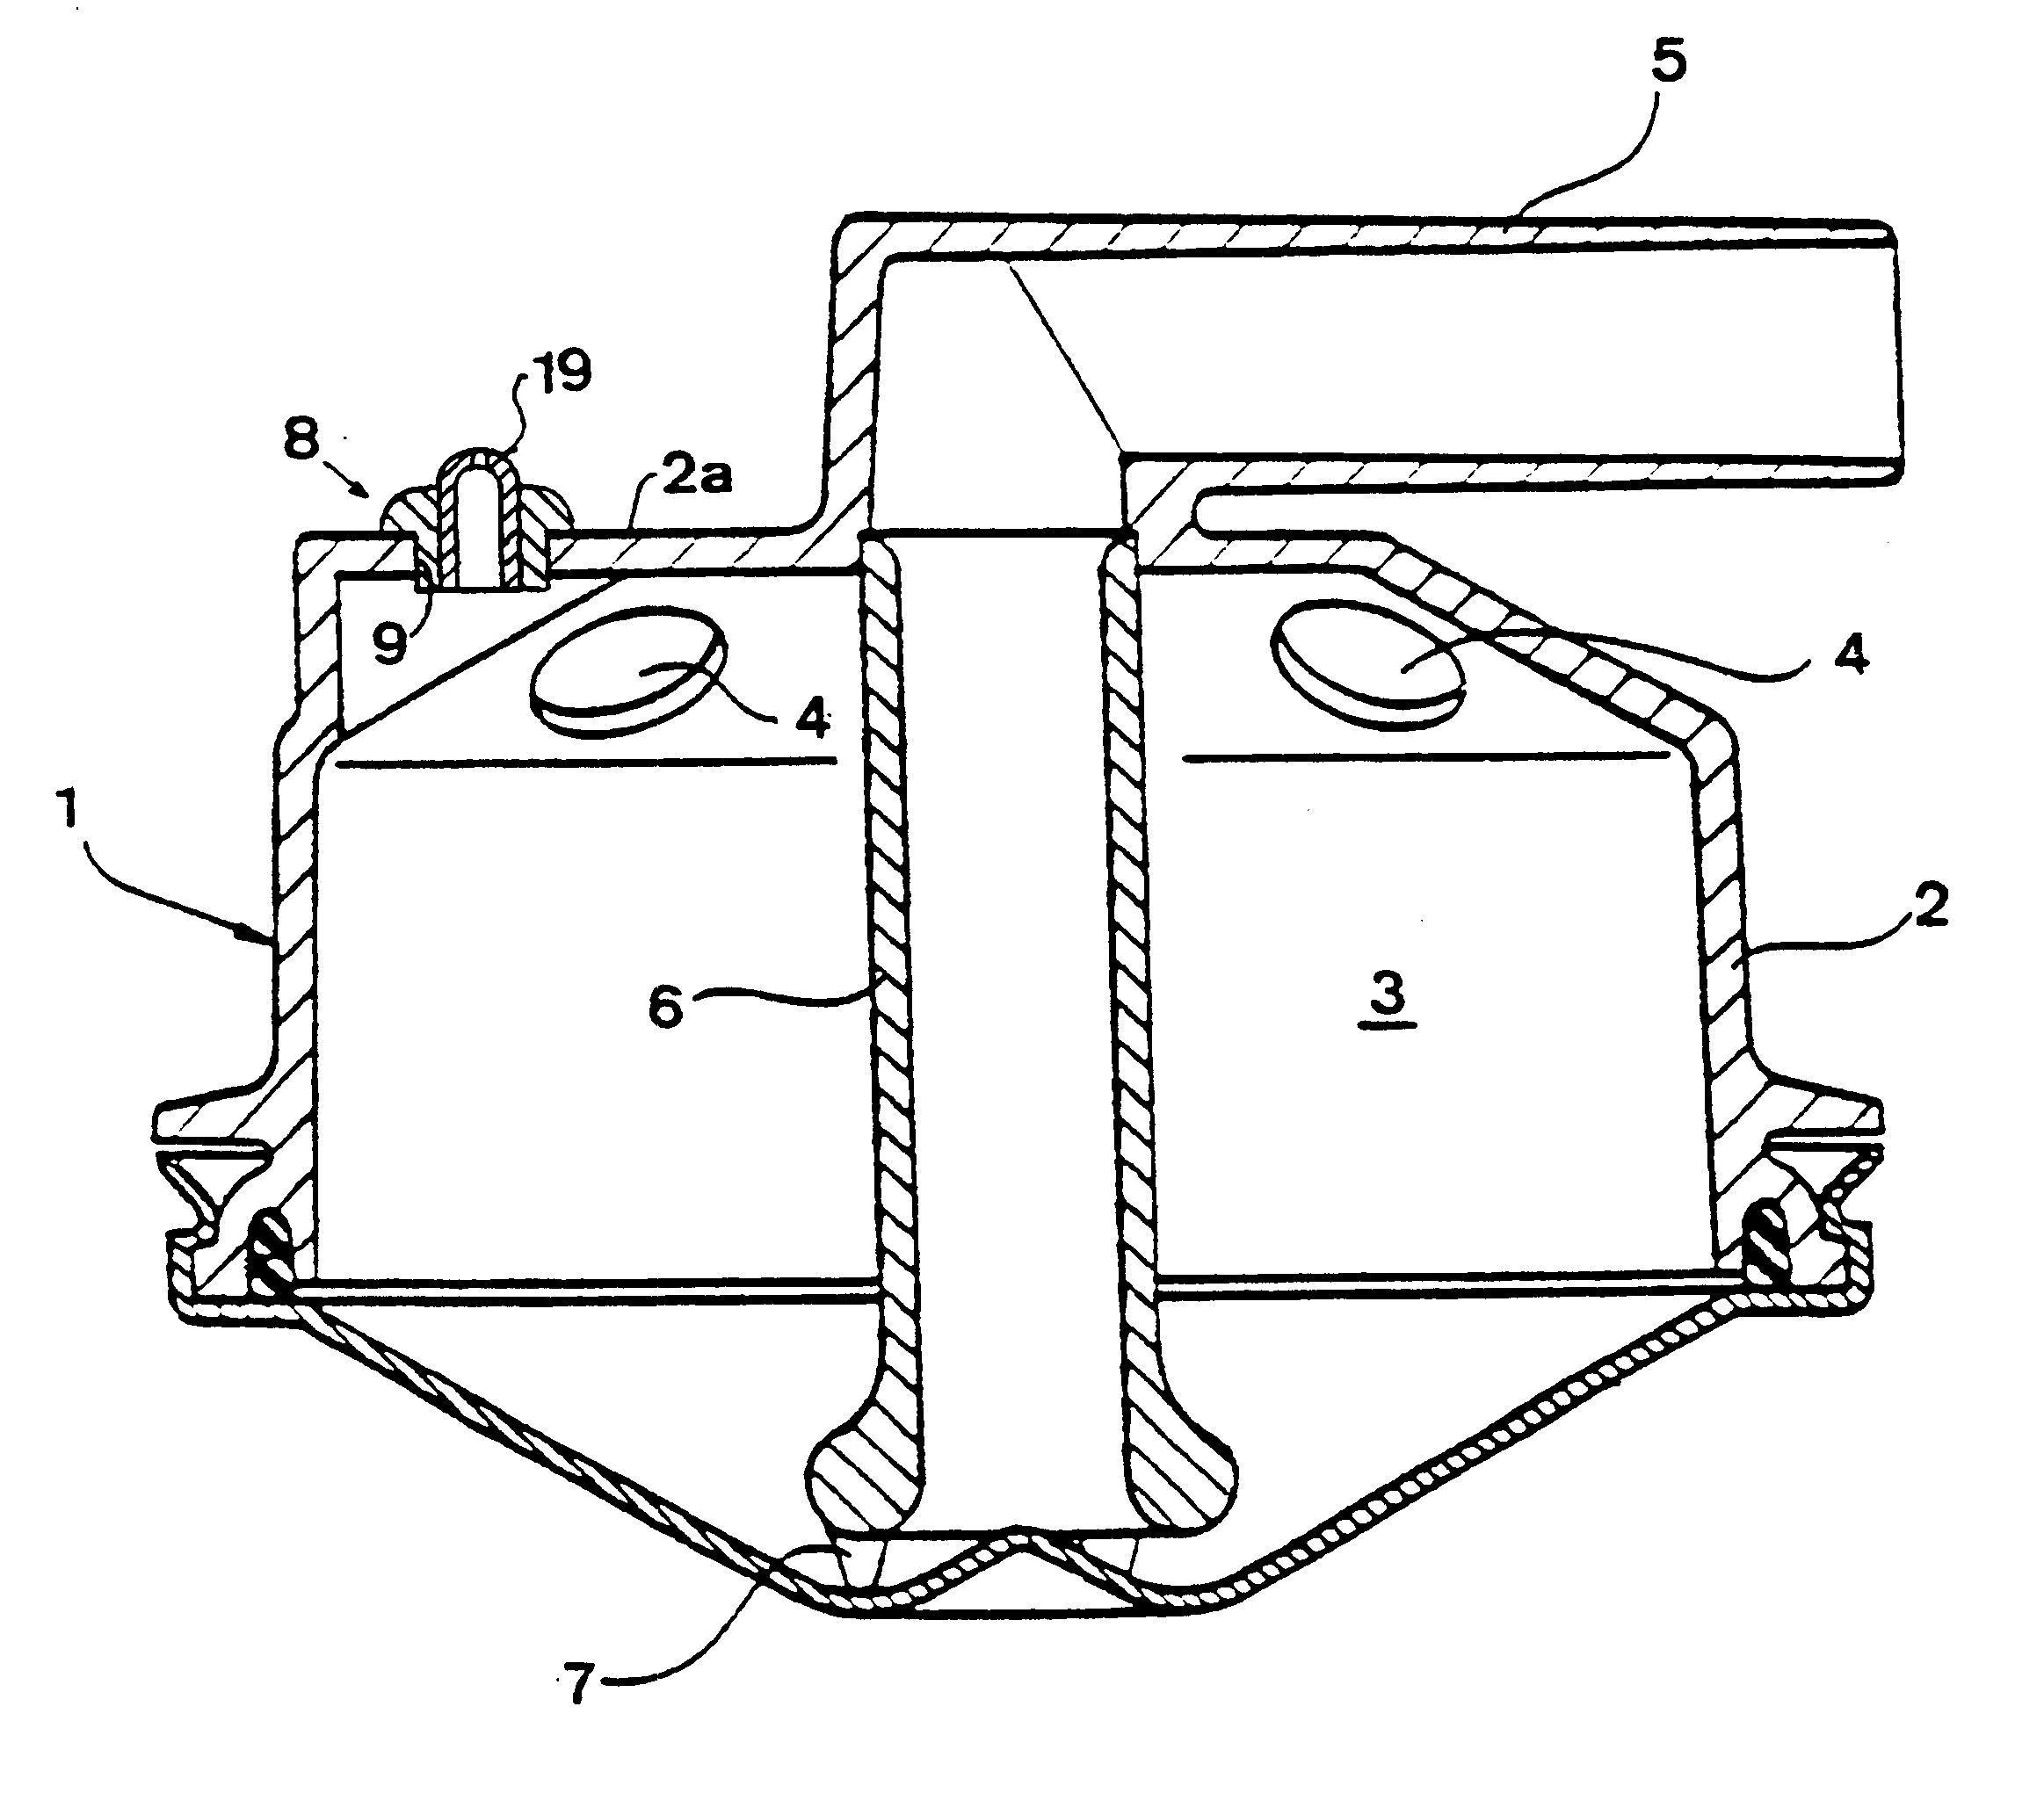 Device arranged to permit an air flow from an environment to an inner space